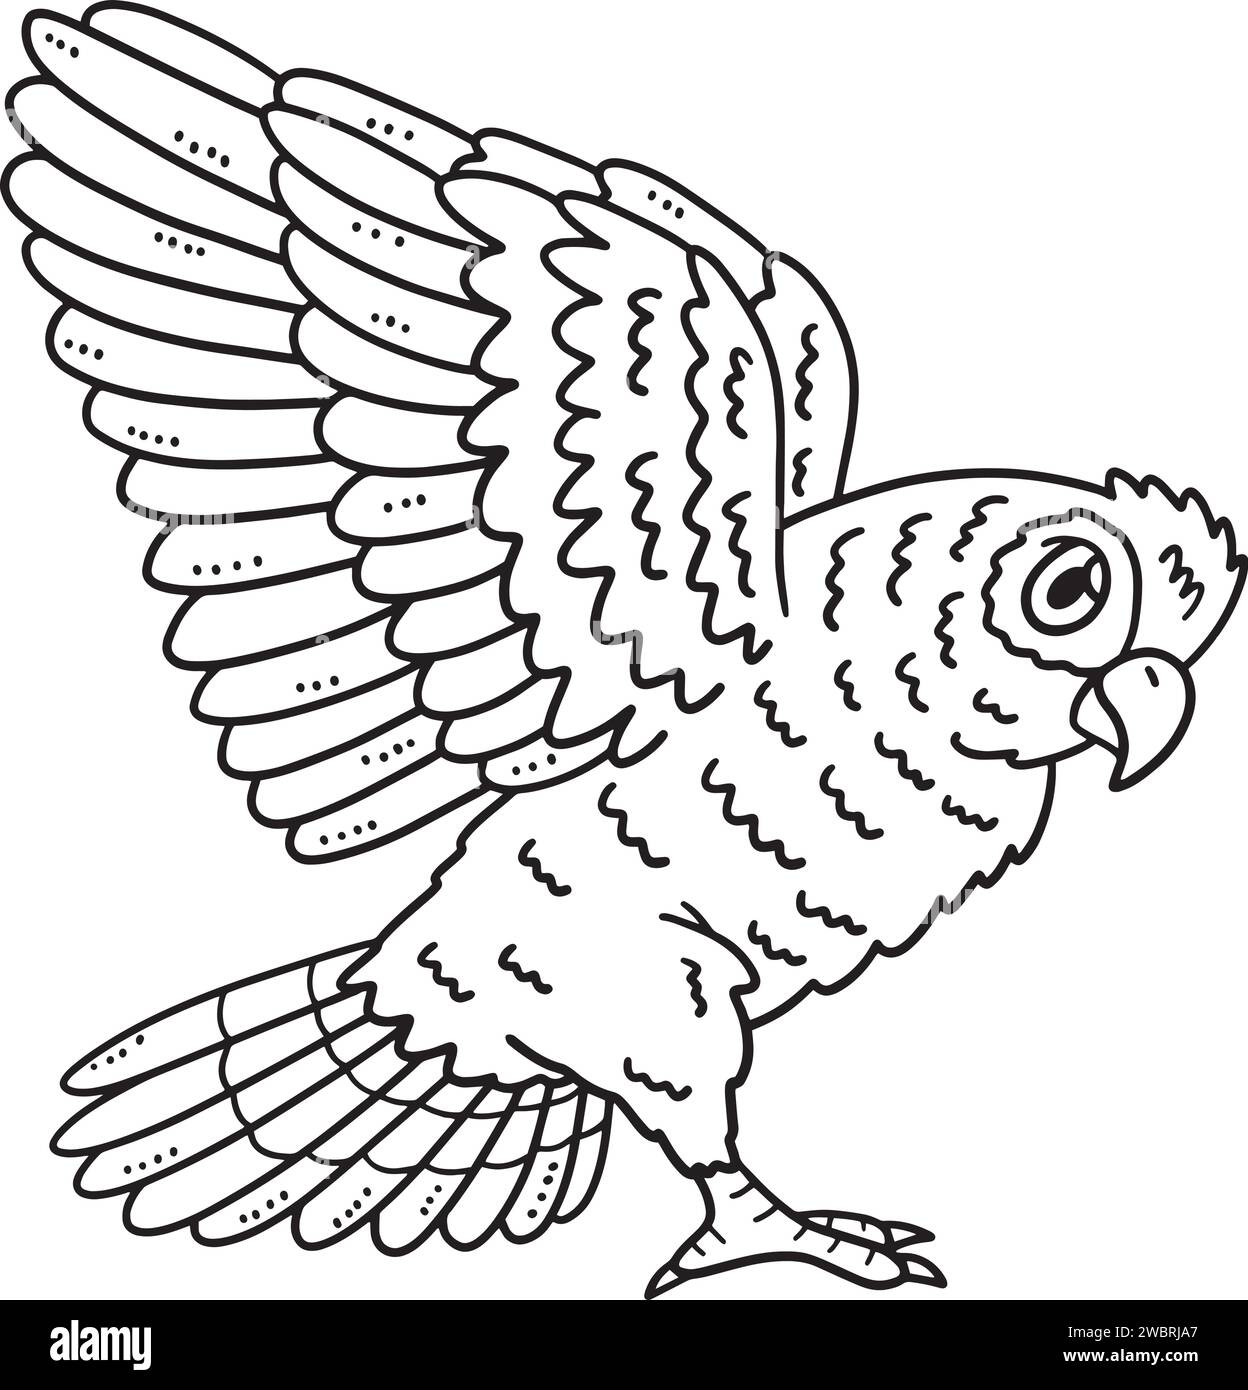 Amazon Parrot Bird Isolated Coloring Page for Kids Illustrazione Vettoriale